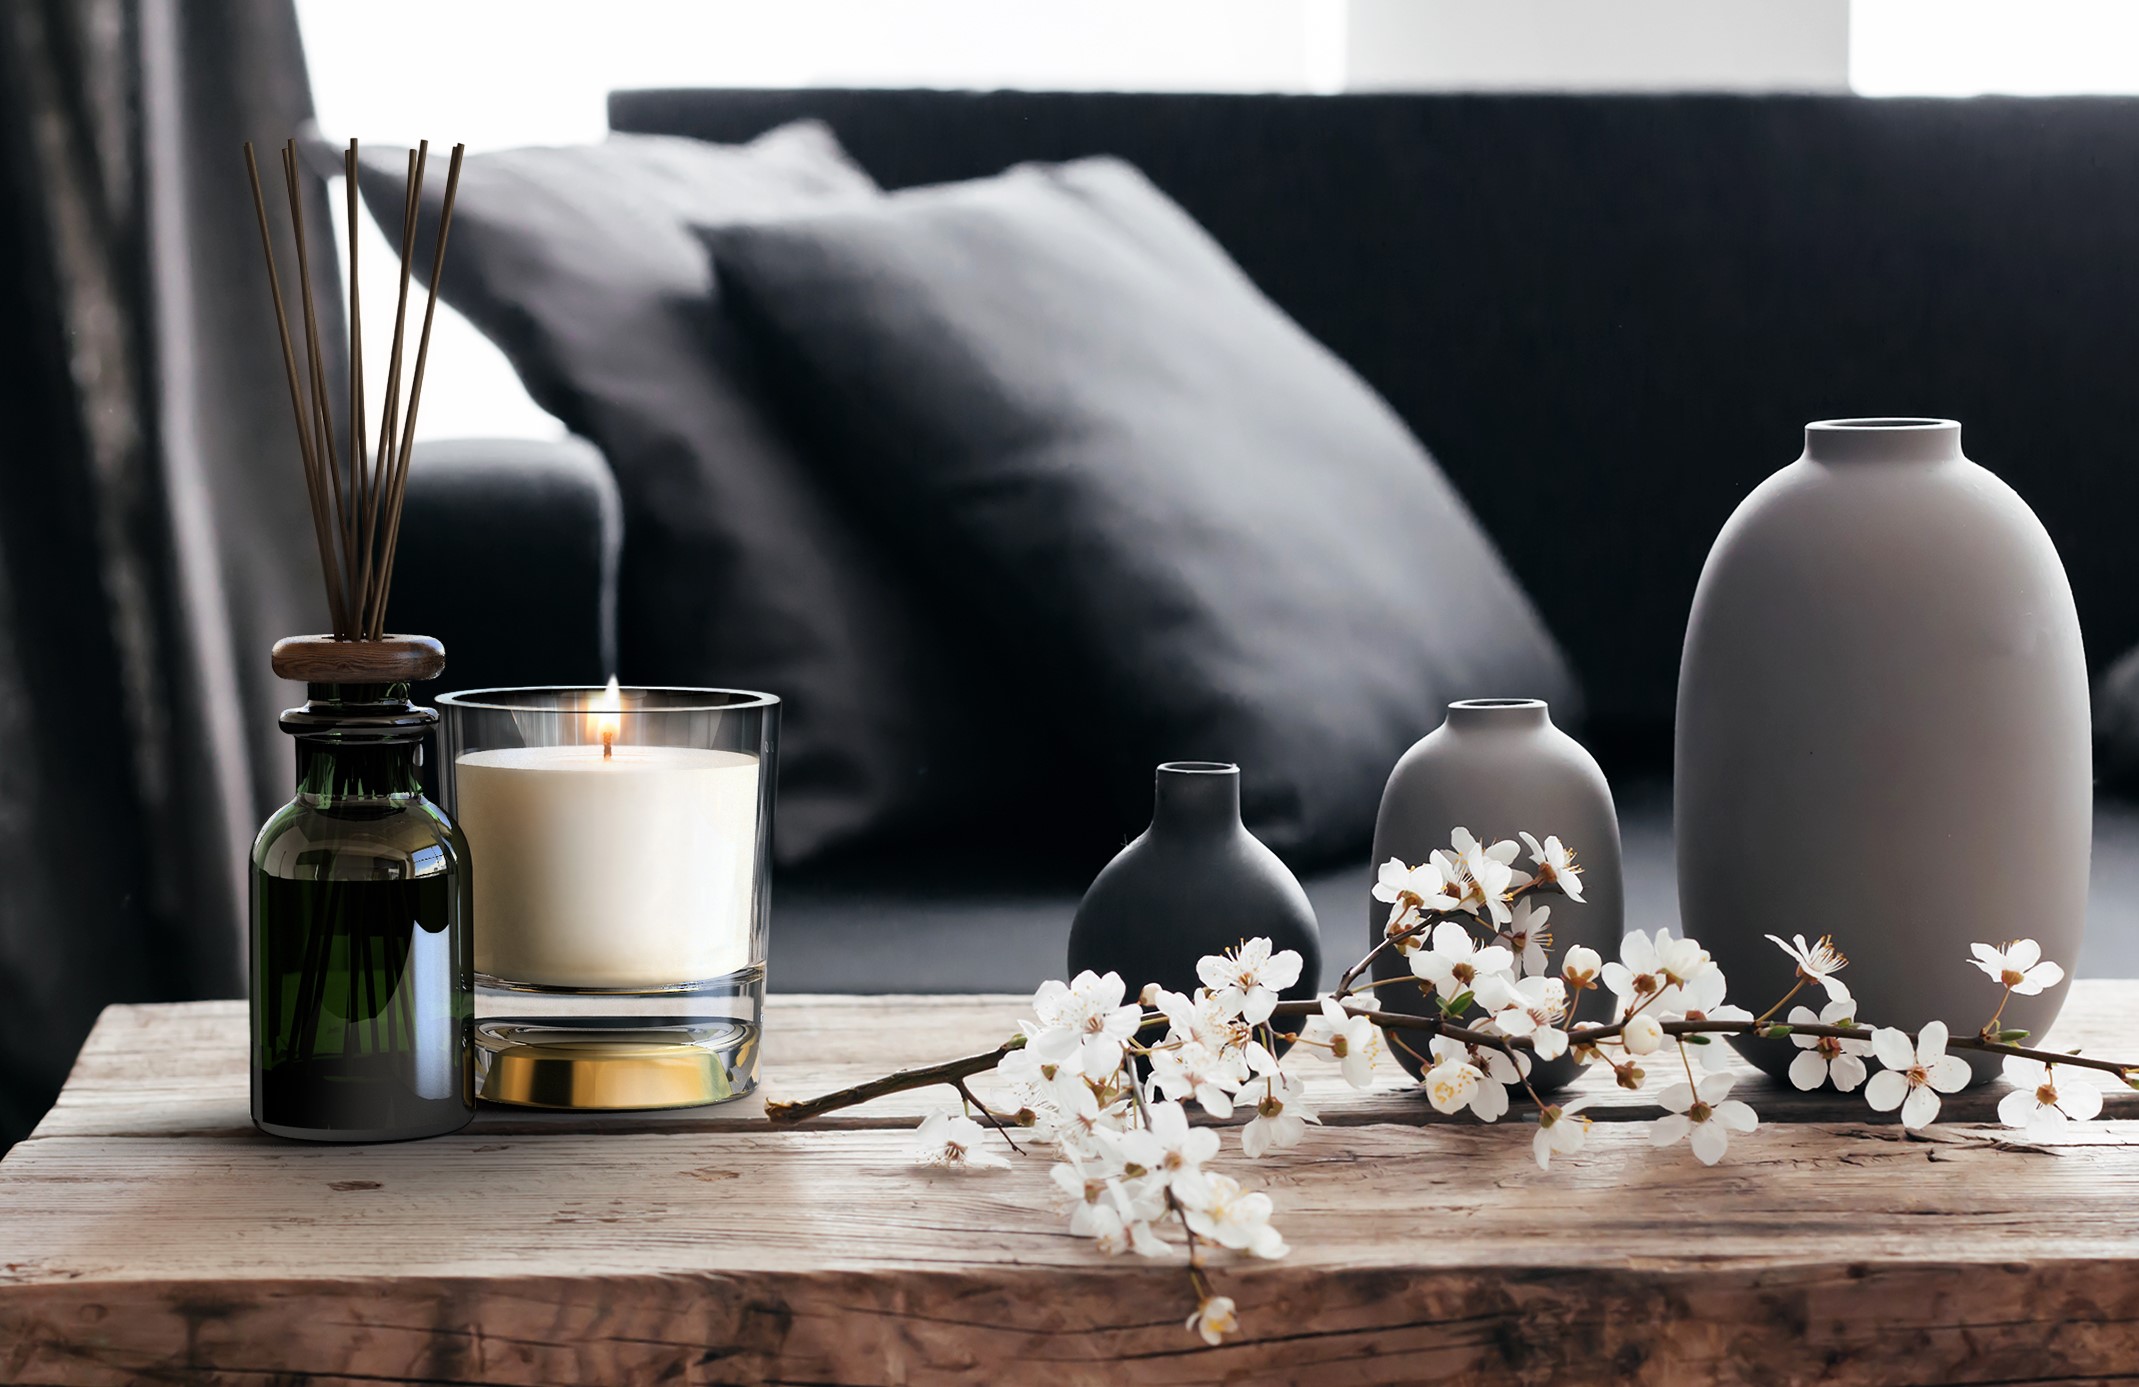 Finding the balance between aroma, colour and beauty in our home in 2020